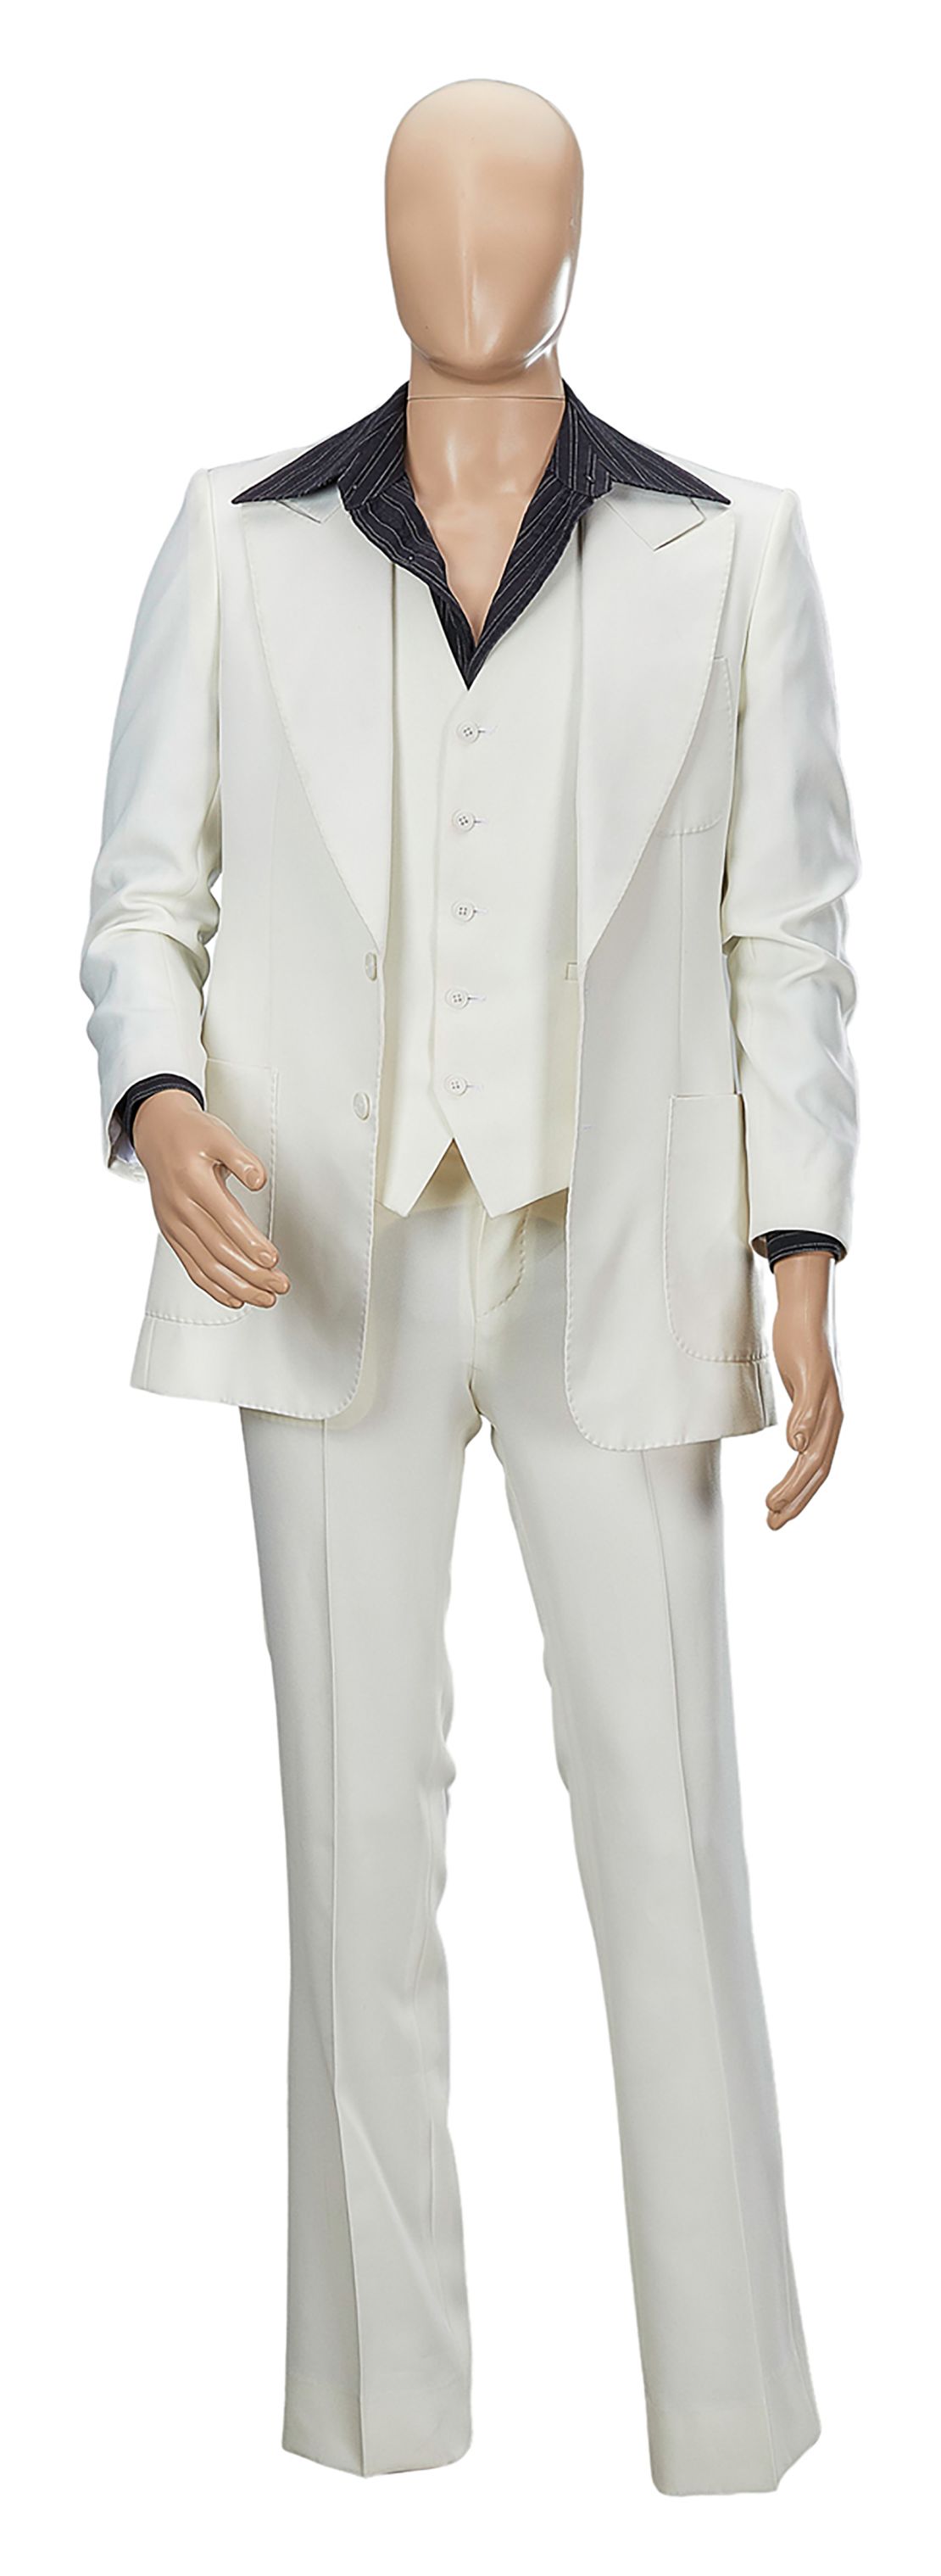 The suit features exaggerated peak lapels. 